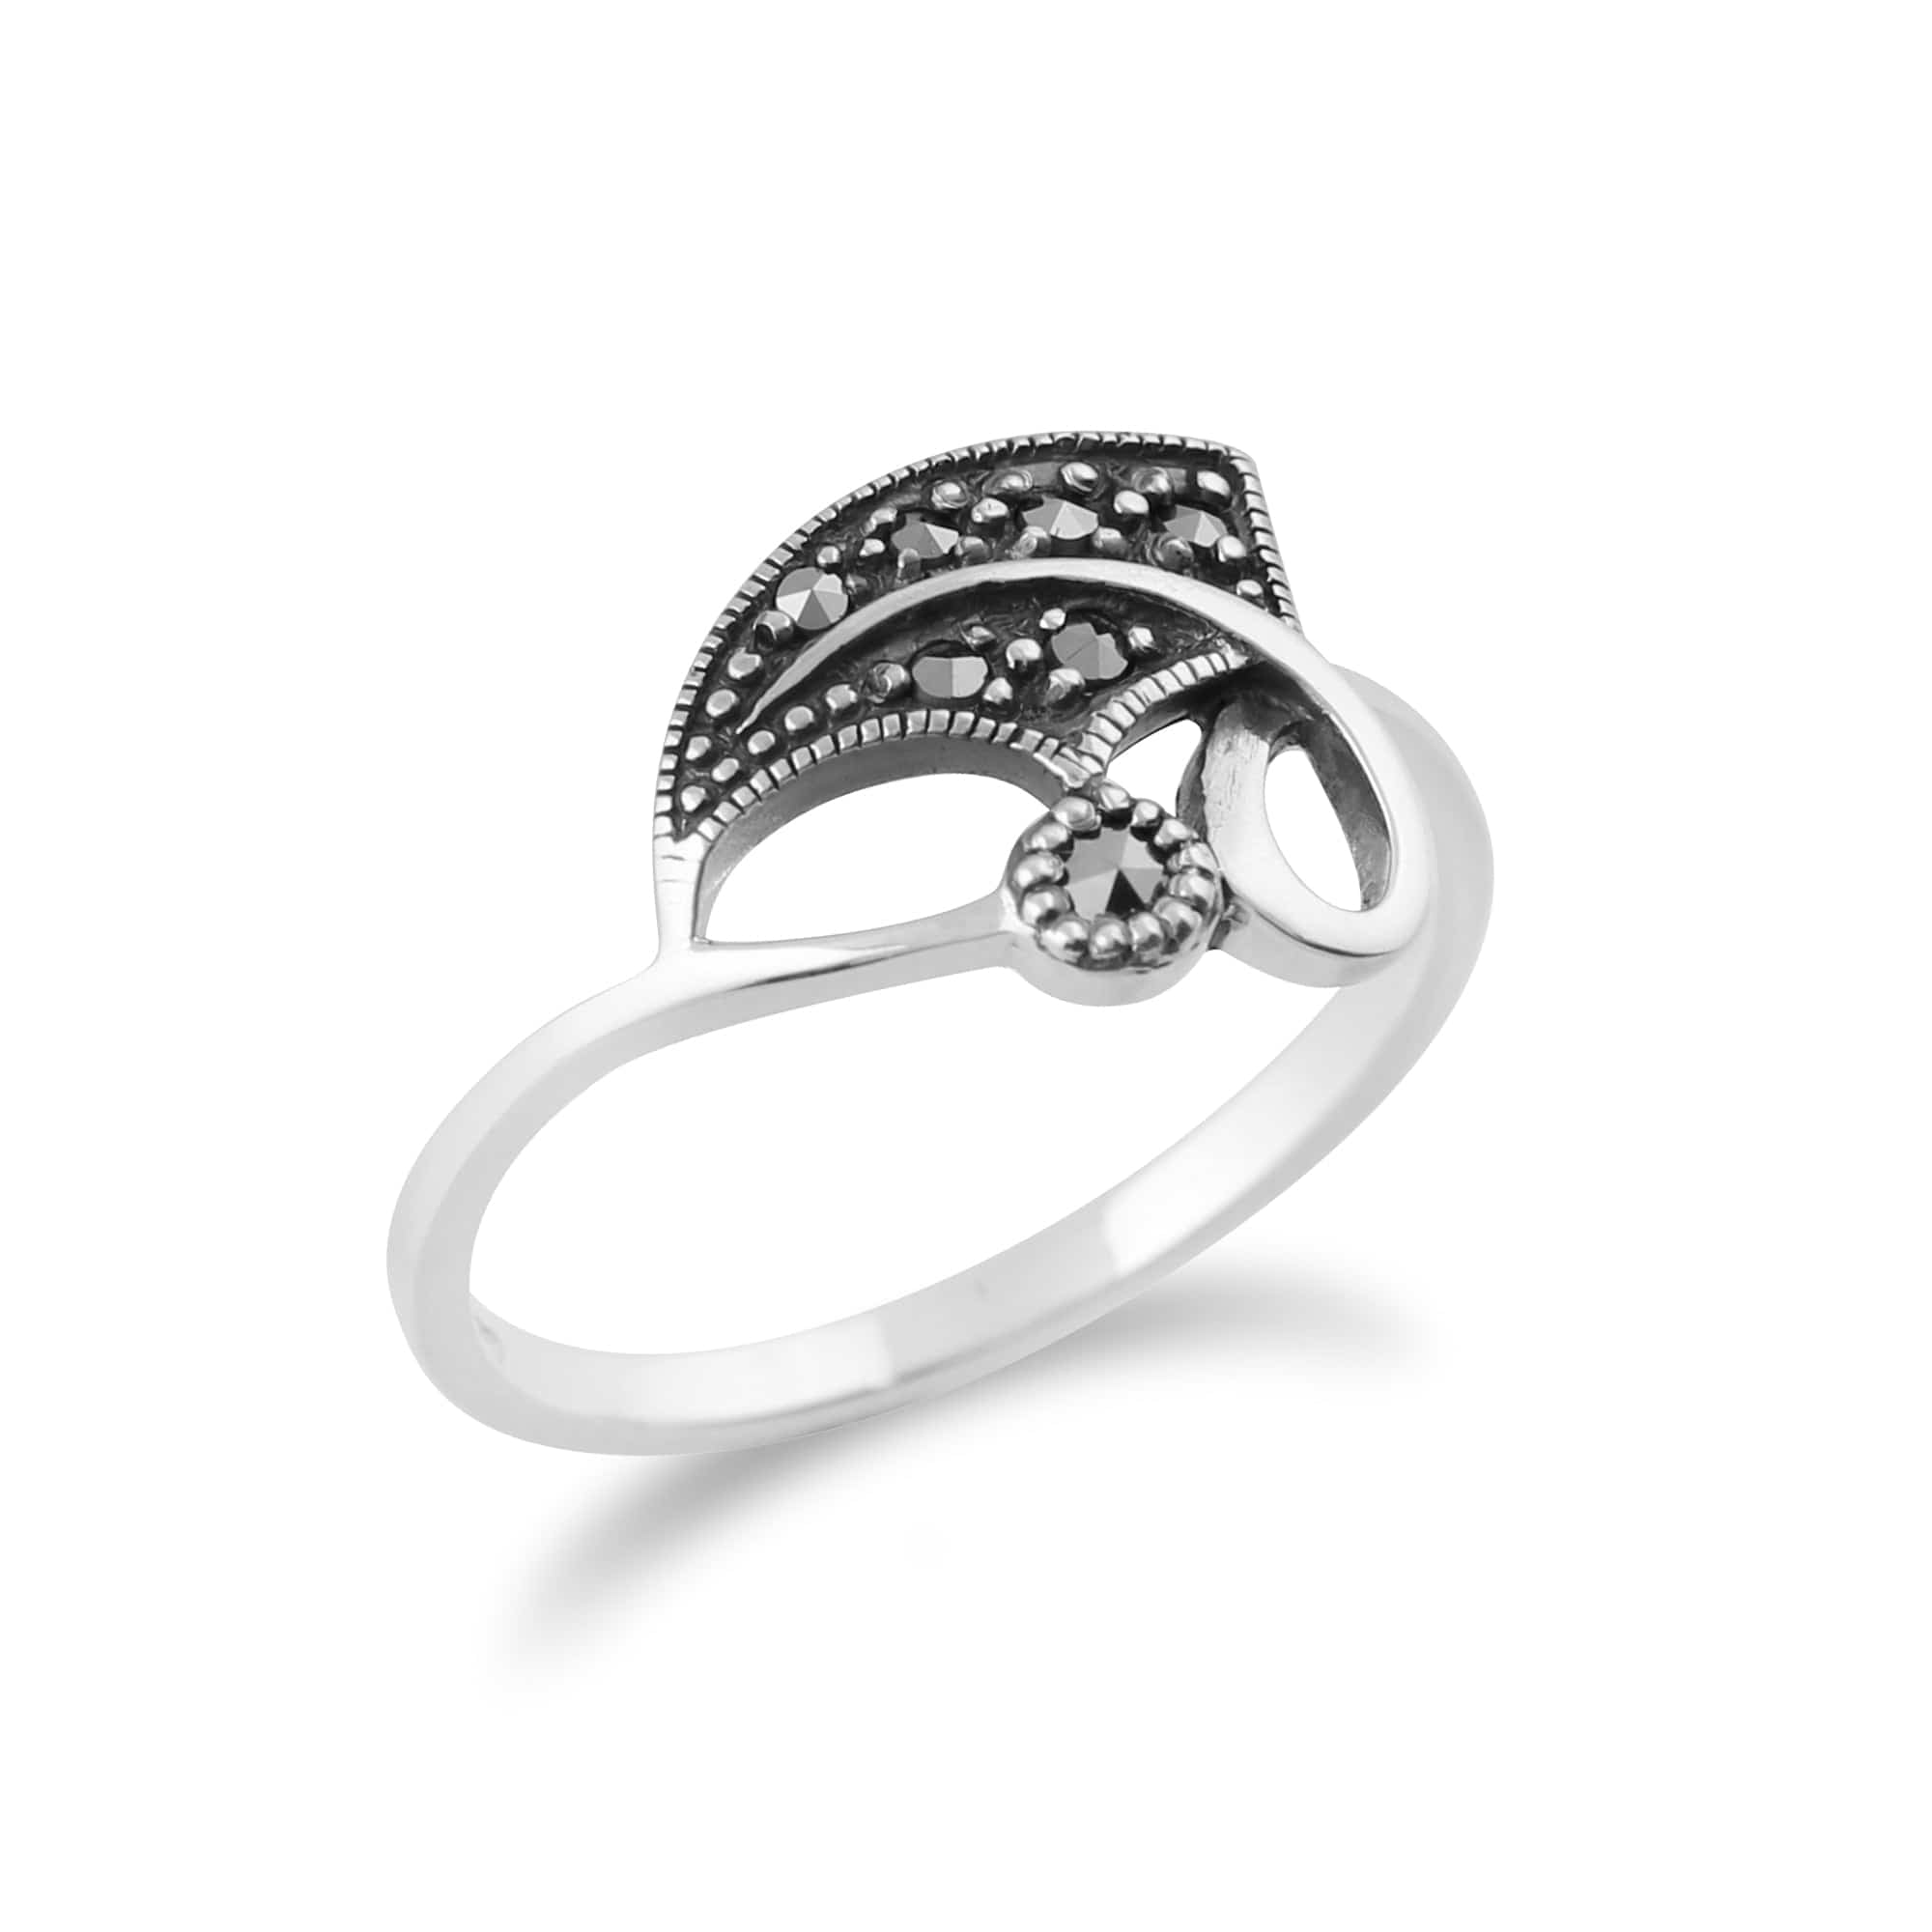 214R587601925 Art Nouveau Style Round Marcasite Leaf Wrap Ring in 925 Sterling Silver 2